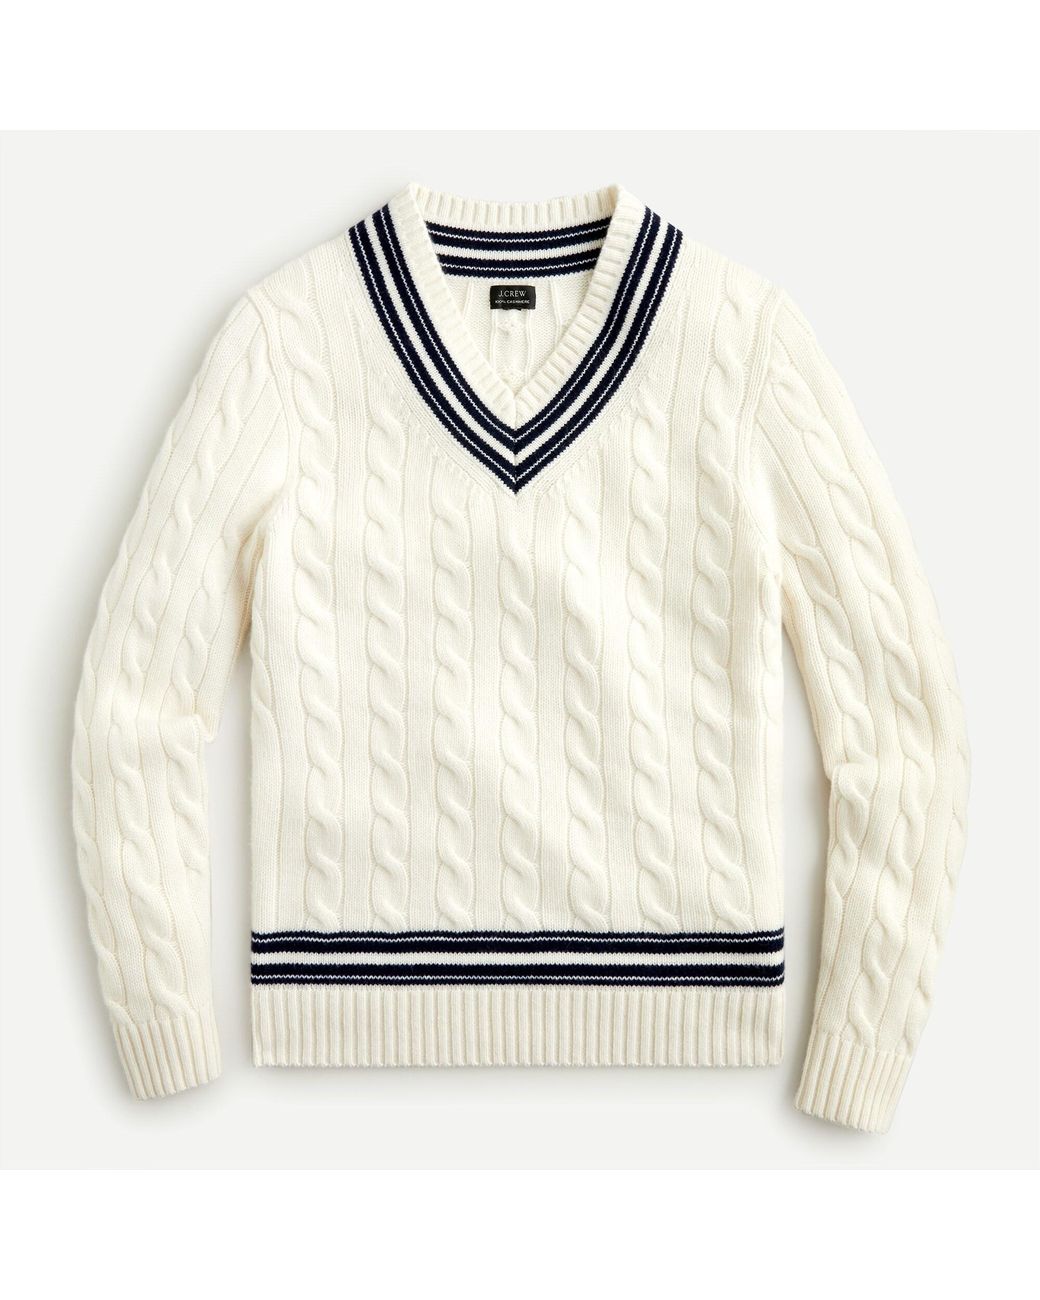 J.Crew Cashmere Cable-knit V-neck Cricket Sweater in White for Men - Lyst